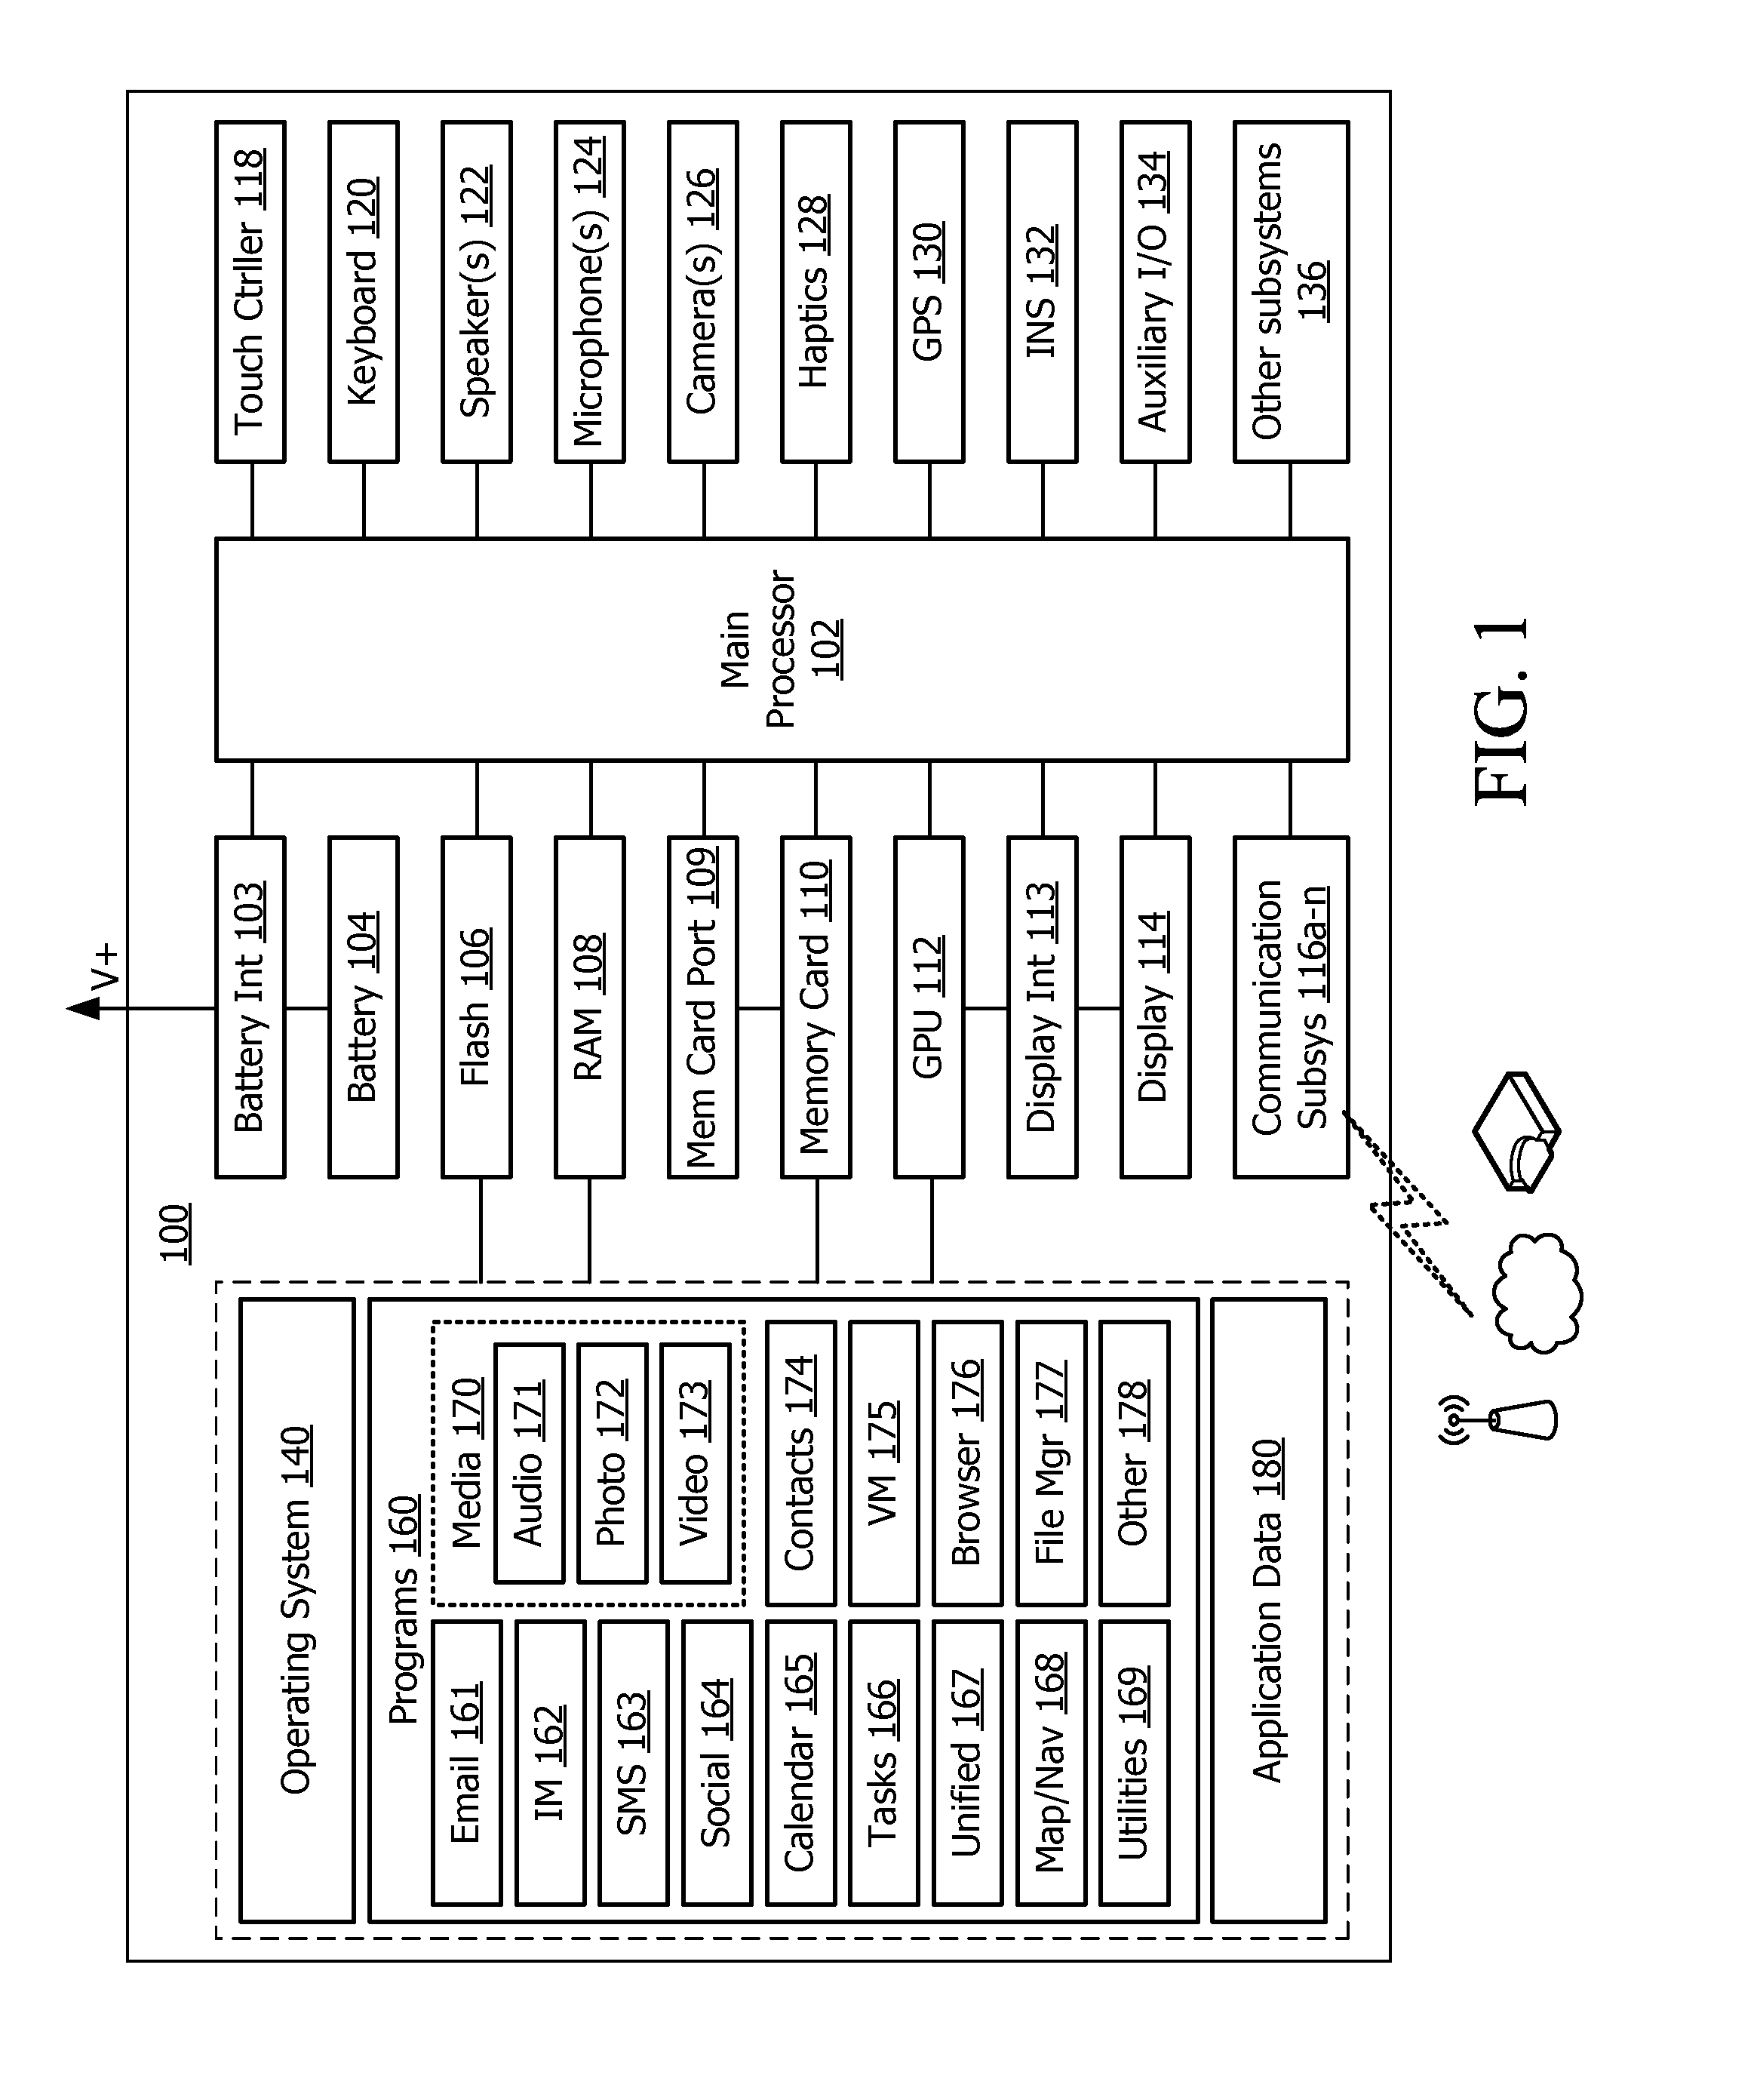 System, method and device-readable medium for communication event interaction within a unified event view